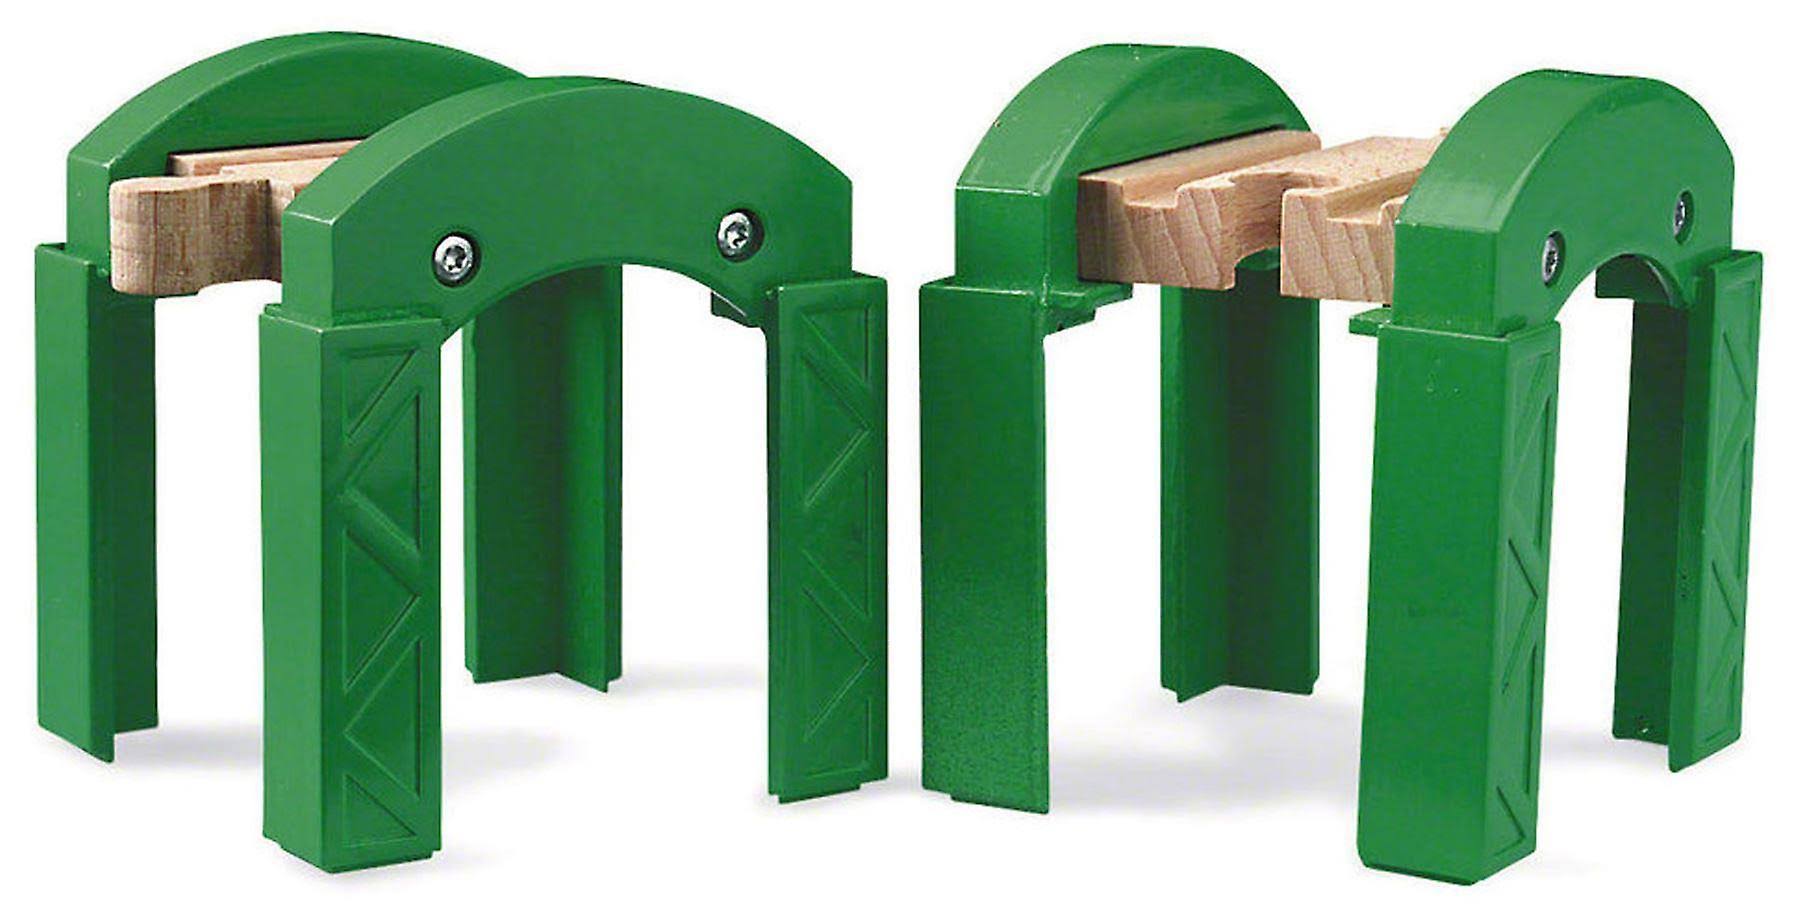 Brio 33253 Wooden Railway System Stacking Track Supports